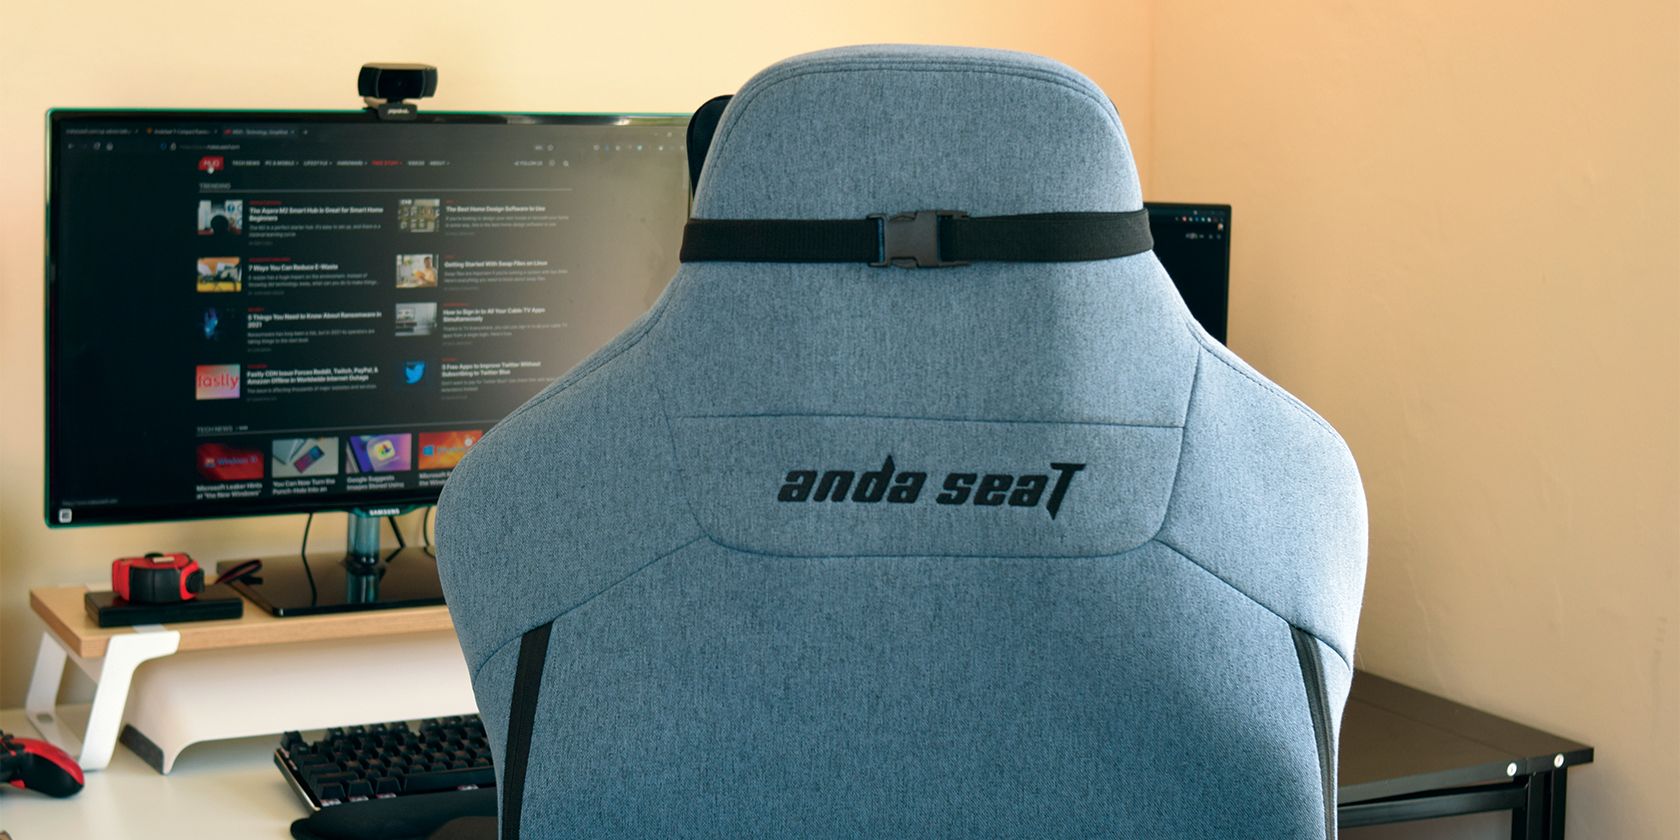 andaseat t-pro 2 gaming chair rear headrest